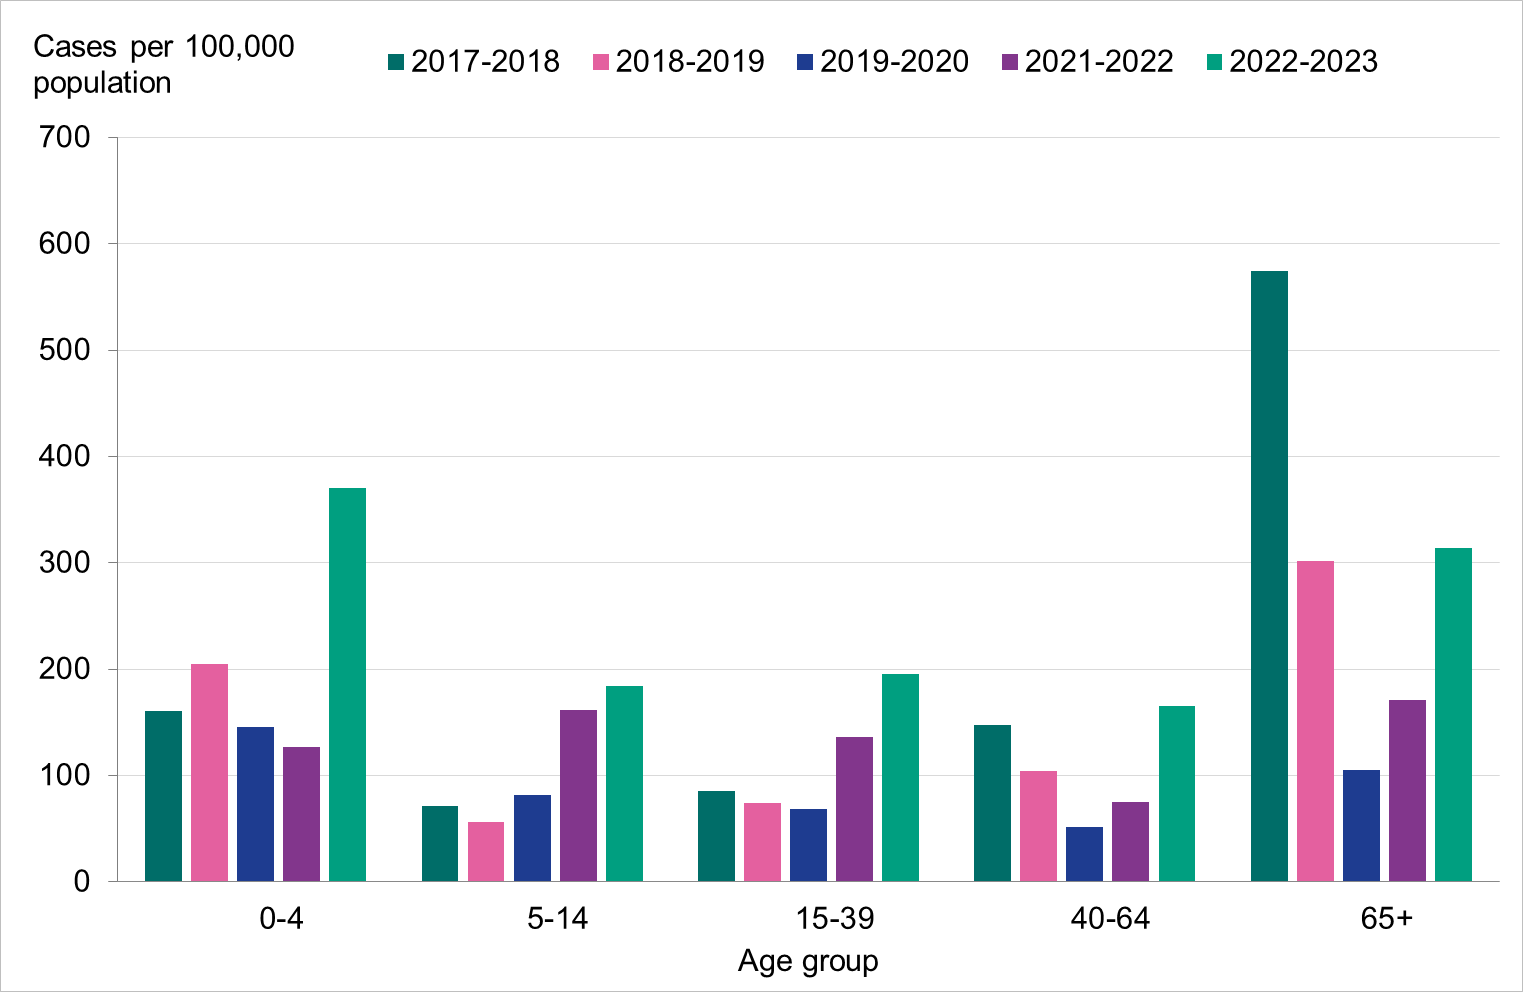 Highest rates are seen among 65 and older and children under 5. The highest rate among 65 and older was in 2017-2018, and in 2022-2023 for children under 5. 